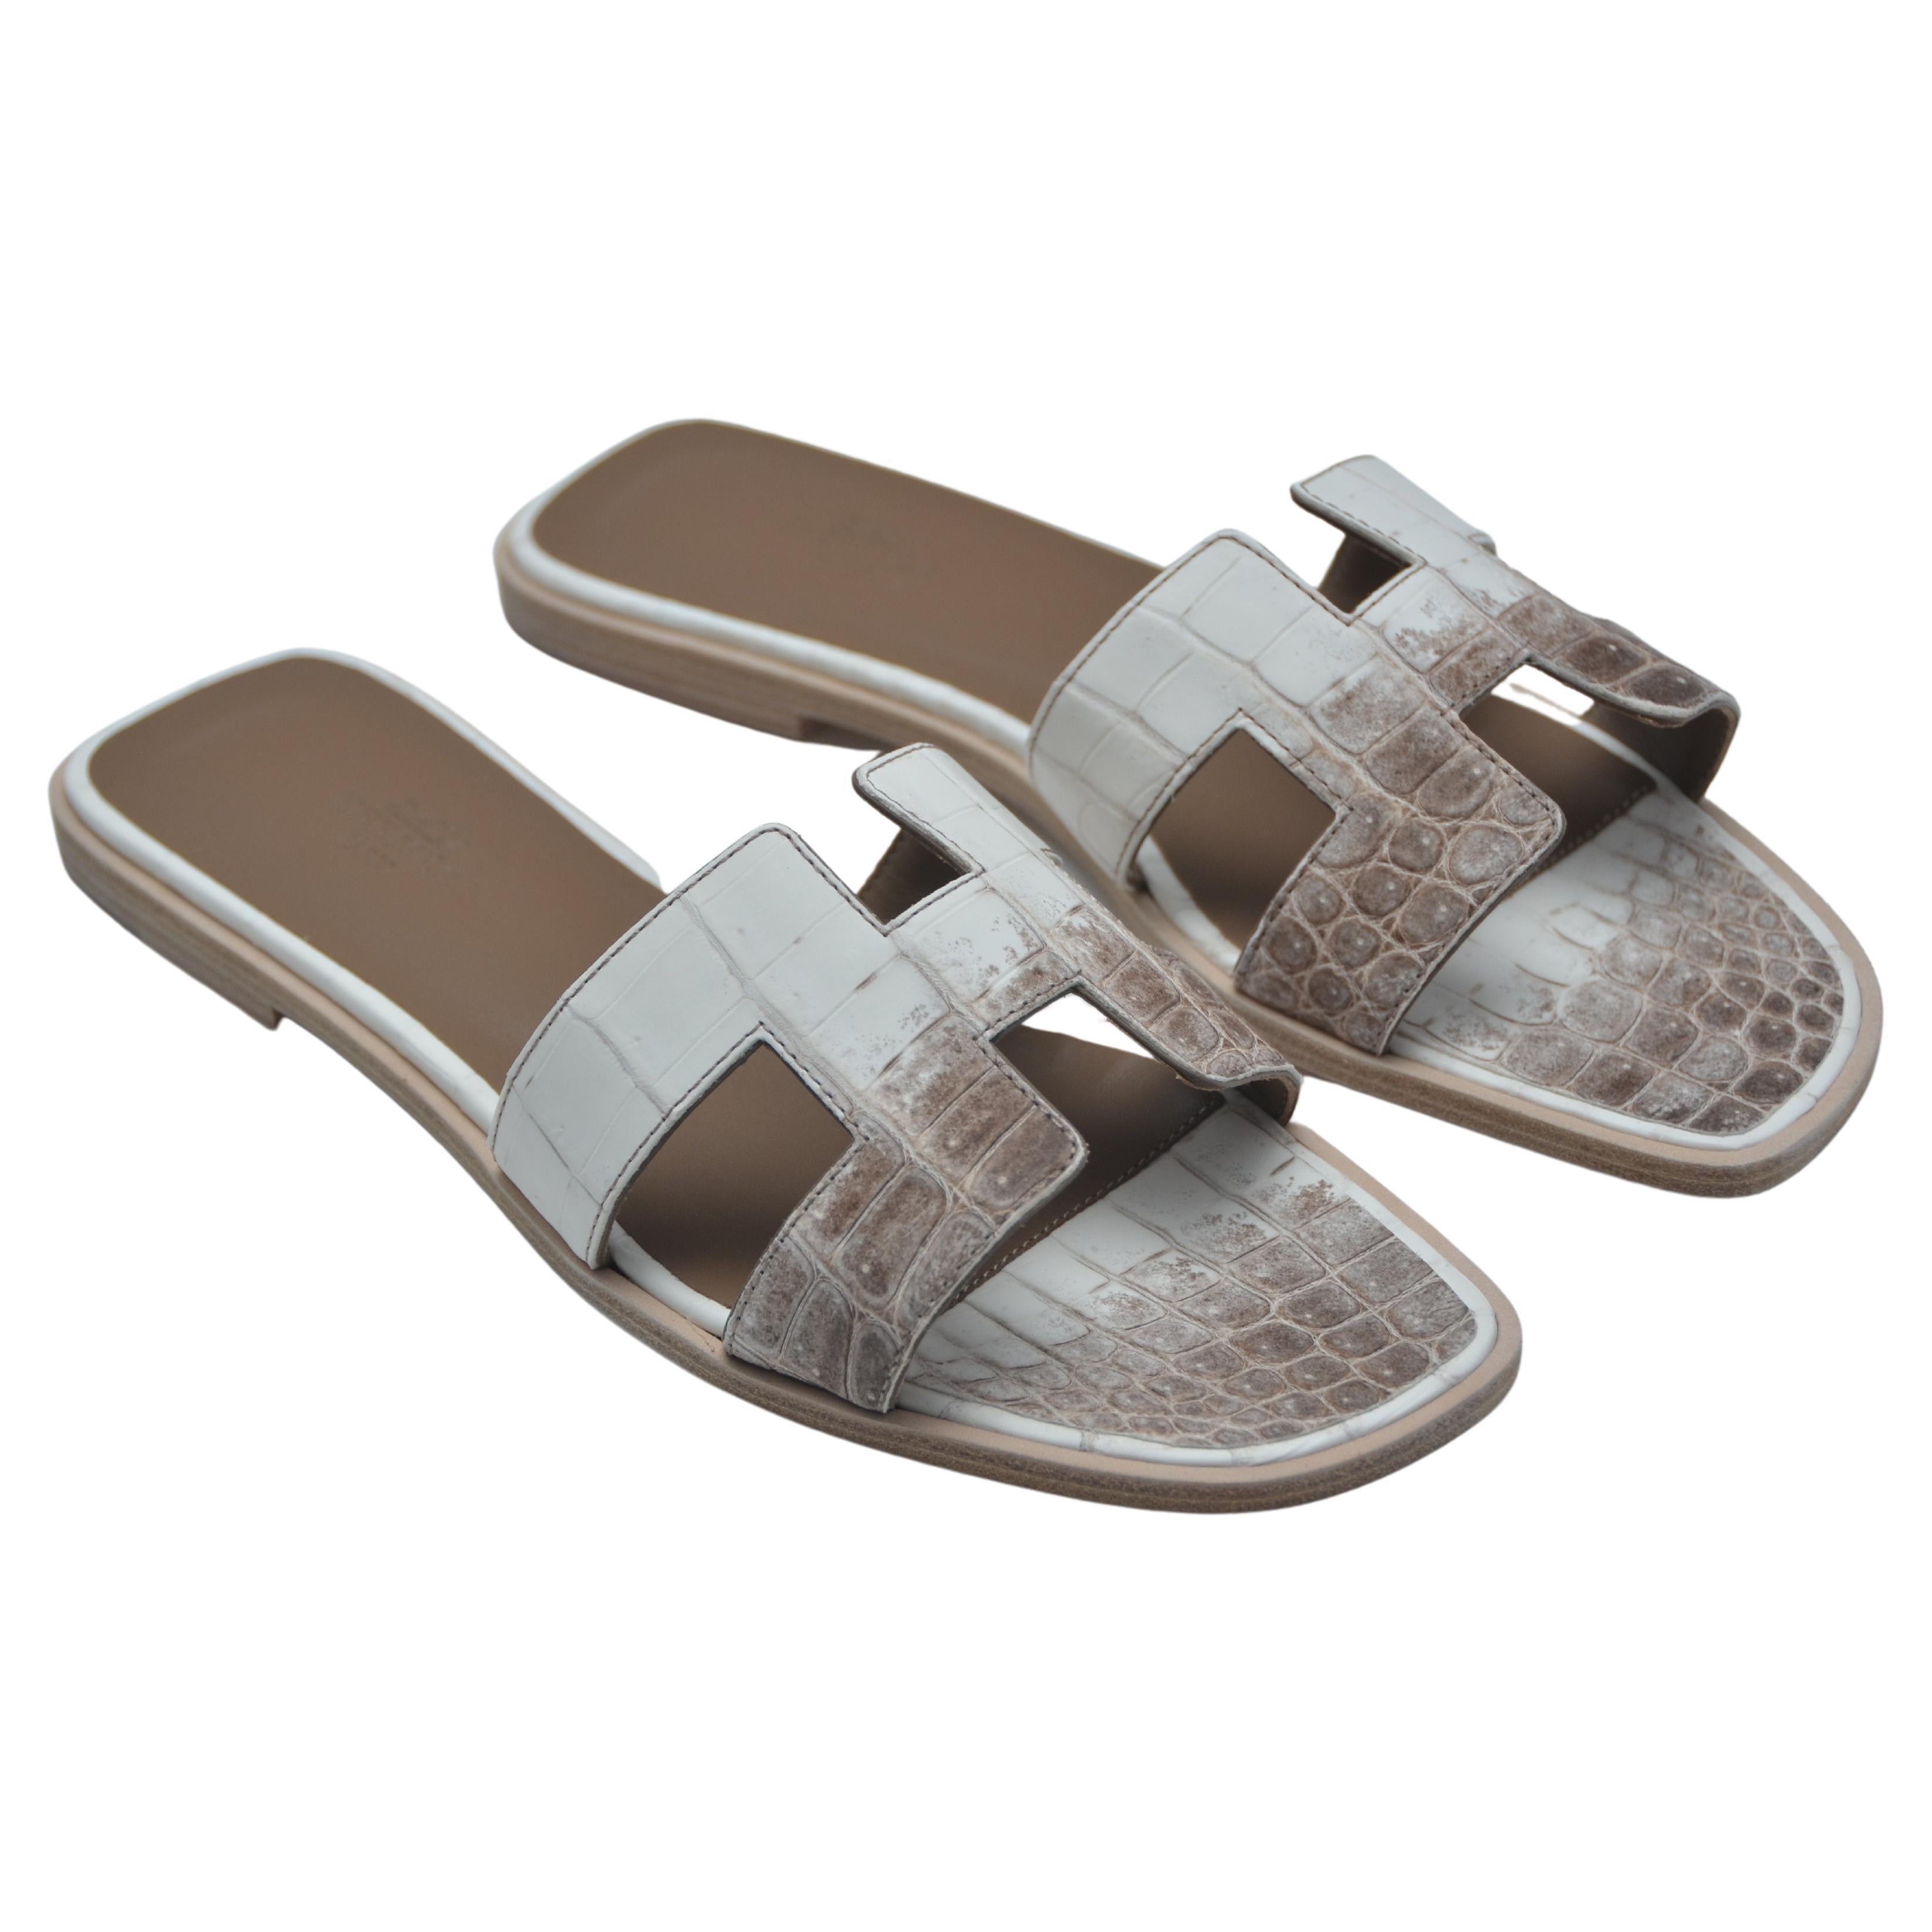 100% authentic guaranteed 
HERMES NEW Blanc/Noisette  Niloticus Crocodile Himalaya Oran Slides Sandals
Size 39
NEW with dust-bags, ribbon ,Cites, booklet  and Hermes box .Some shipping restrictions apply since these are crocodile .
Made In